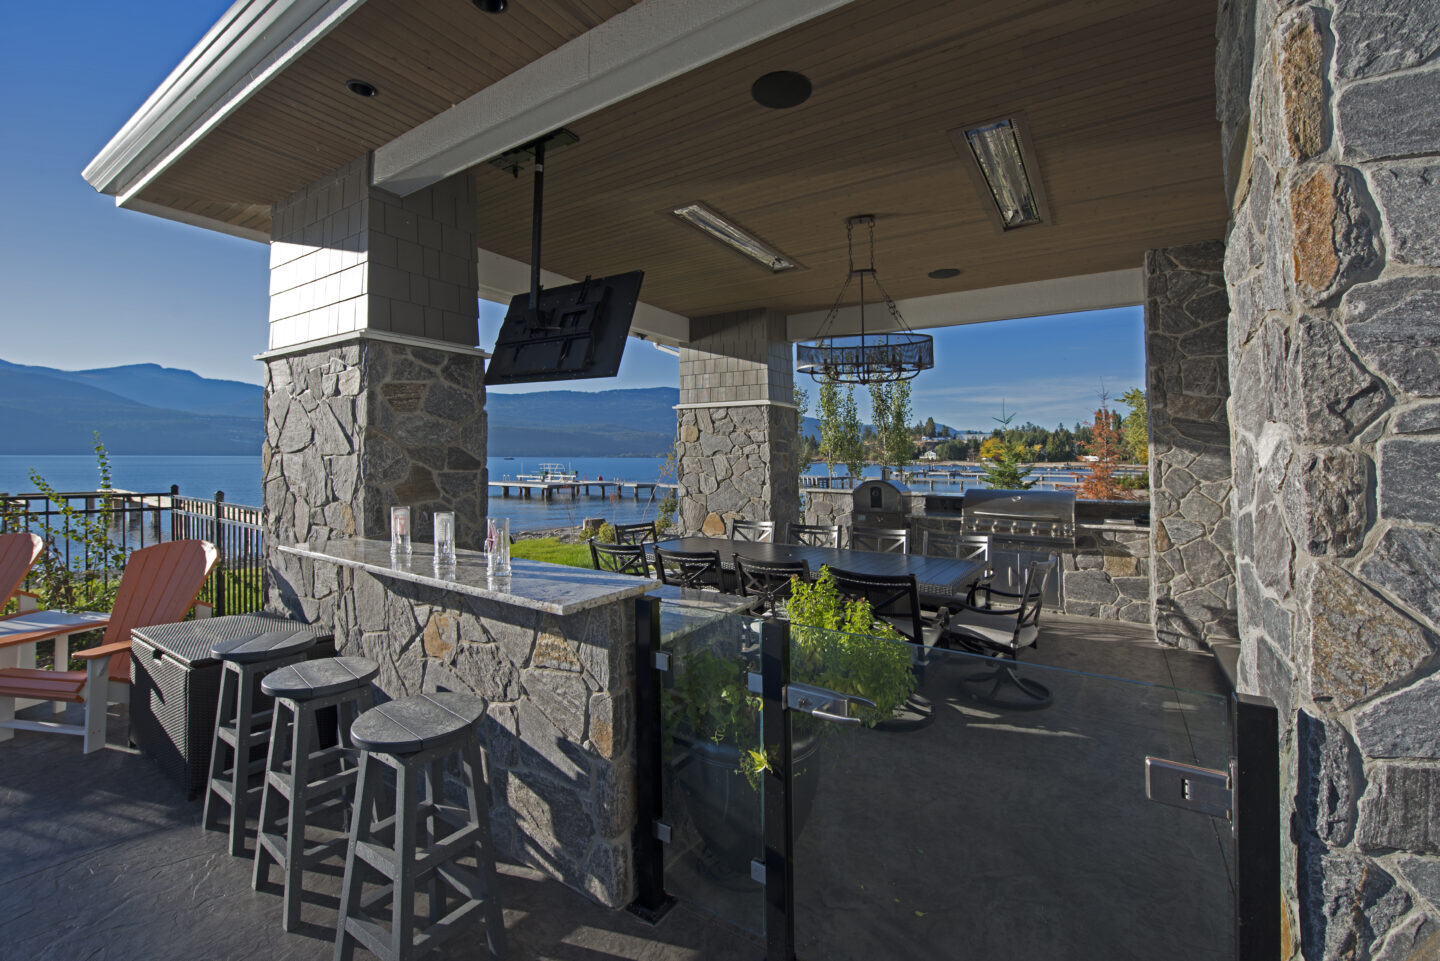 West Coast Fieldstone by Pangaea Stone - Installed in a breathtaking outdoor living area